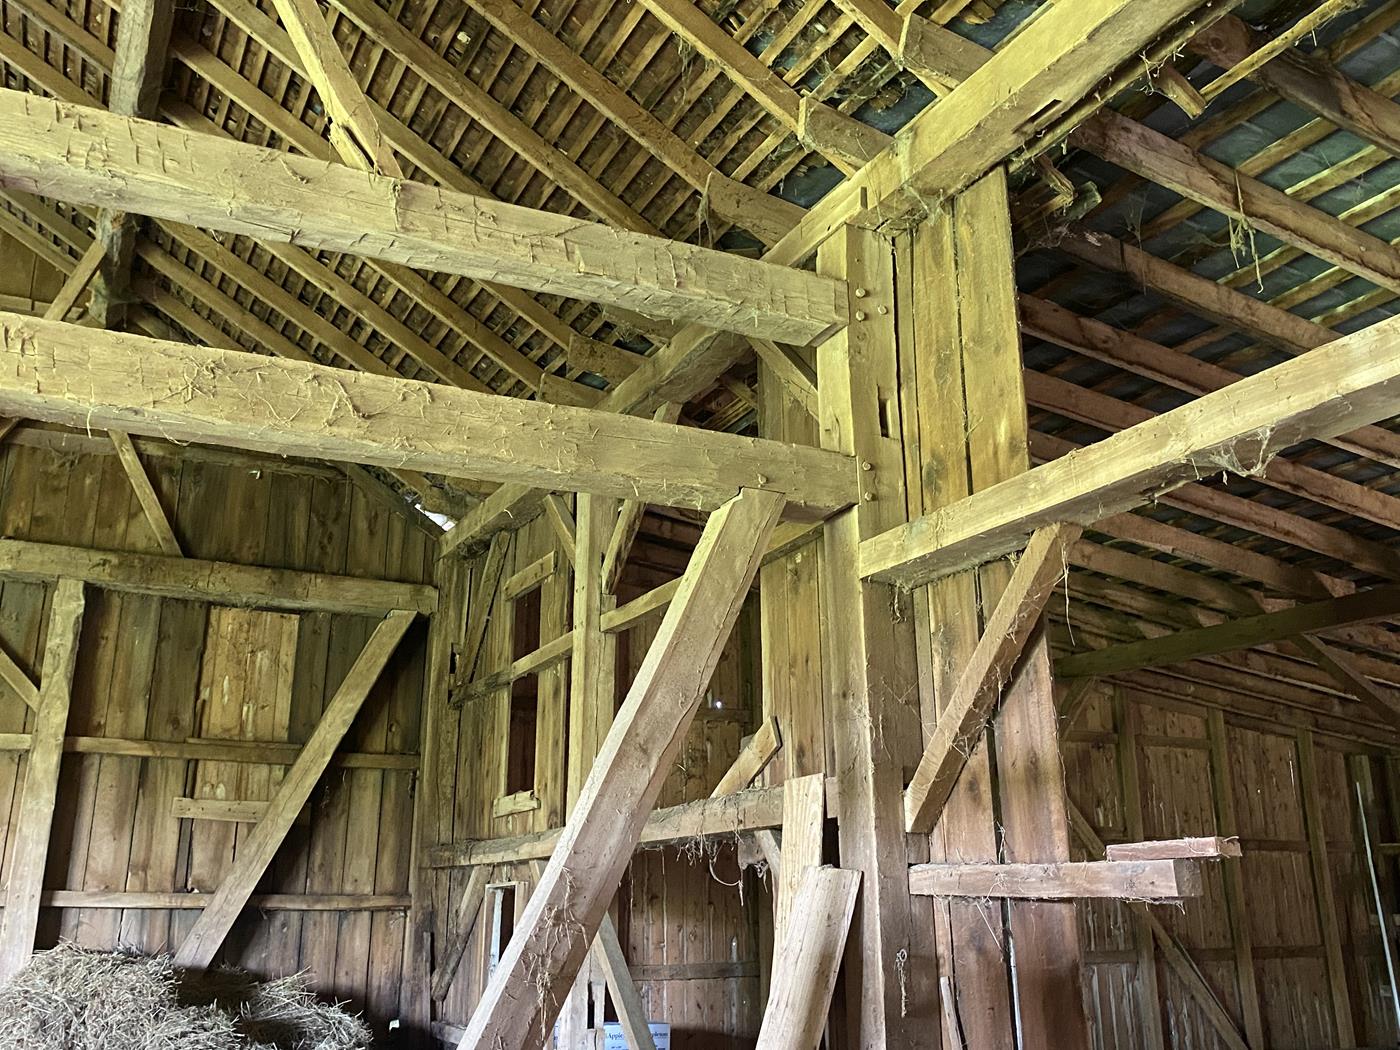 https://www.ohiovalleybarnsalvage.com/images/Marlatt Historic Ohio Barn Frame For Sale - Your Source For Sawn Barn Timbers